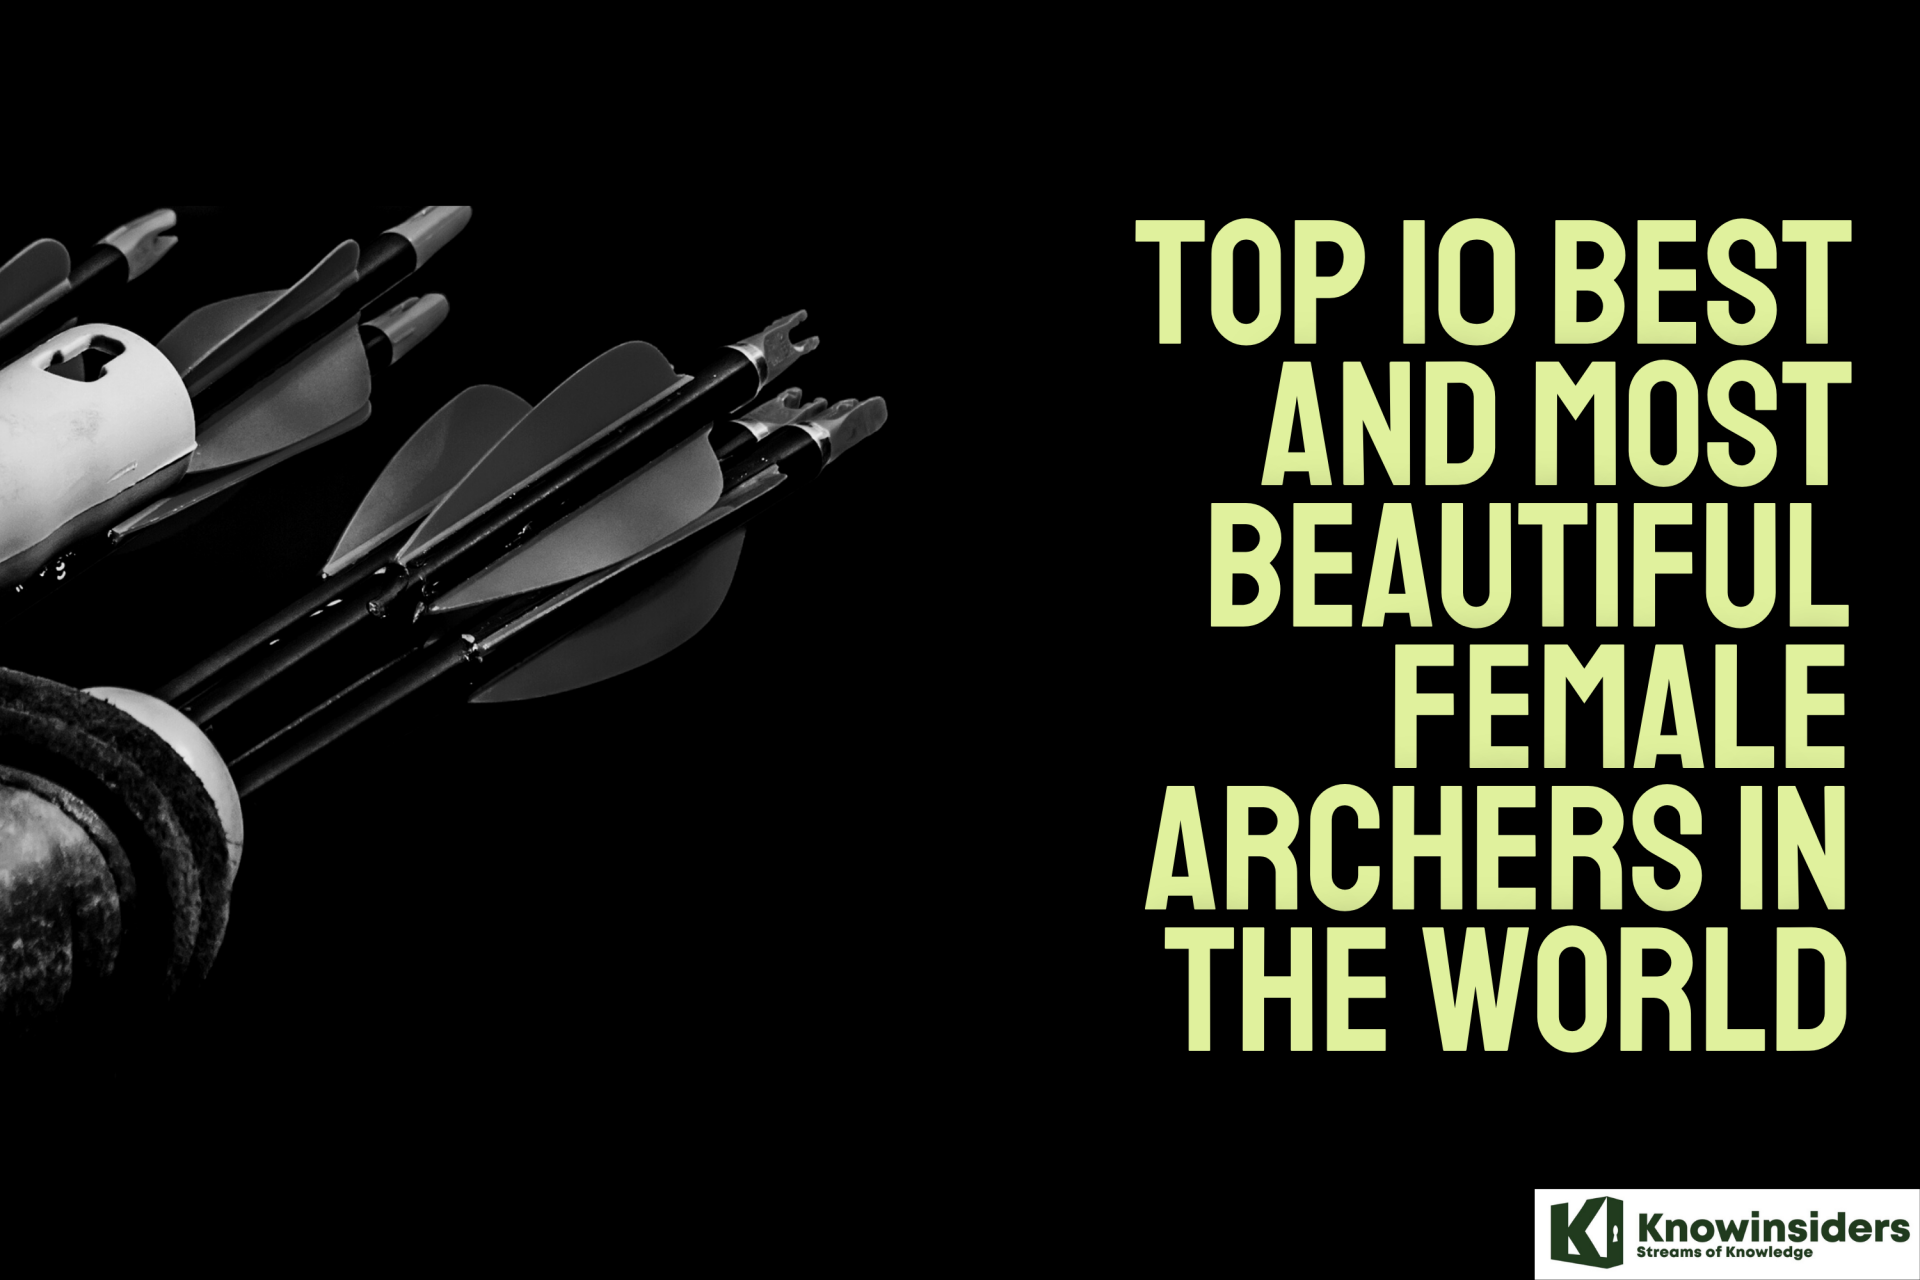 Top 10 Best and Most Beautiful Female Archers in The World